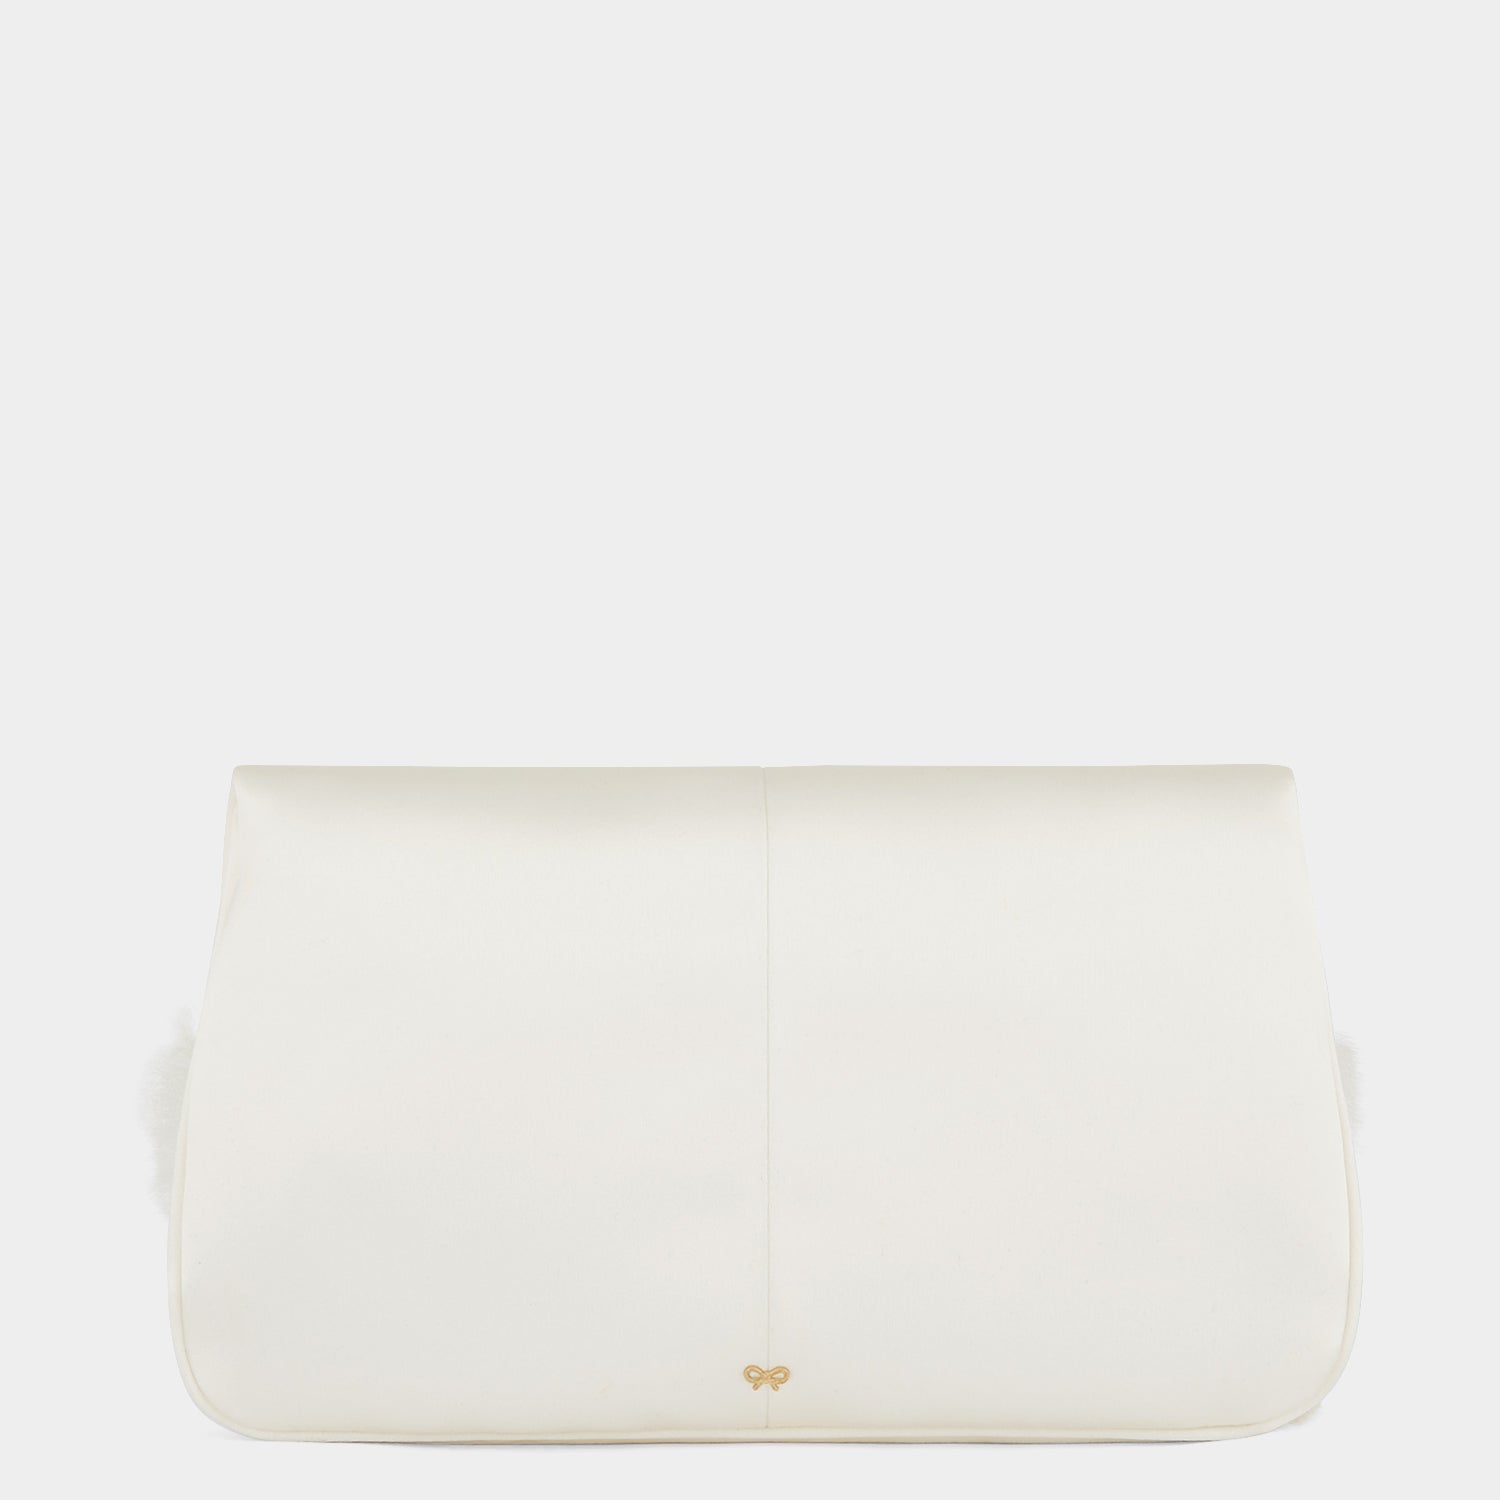 Tiffany & Fred Woven Leather Top-Handle Bag/Clutch – Tiffany & Fred Paris